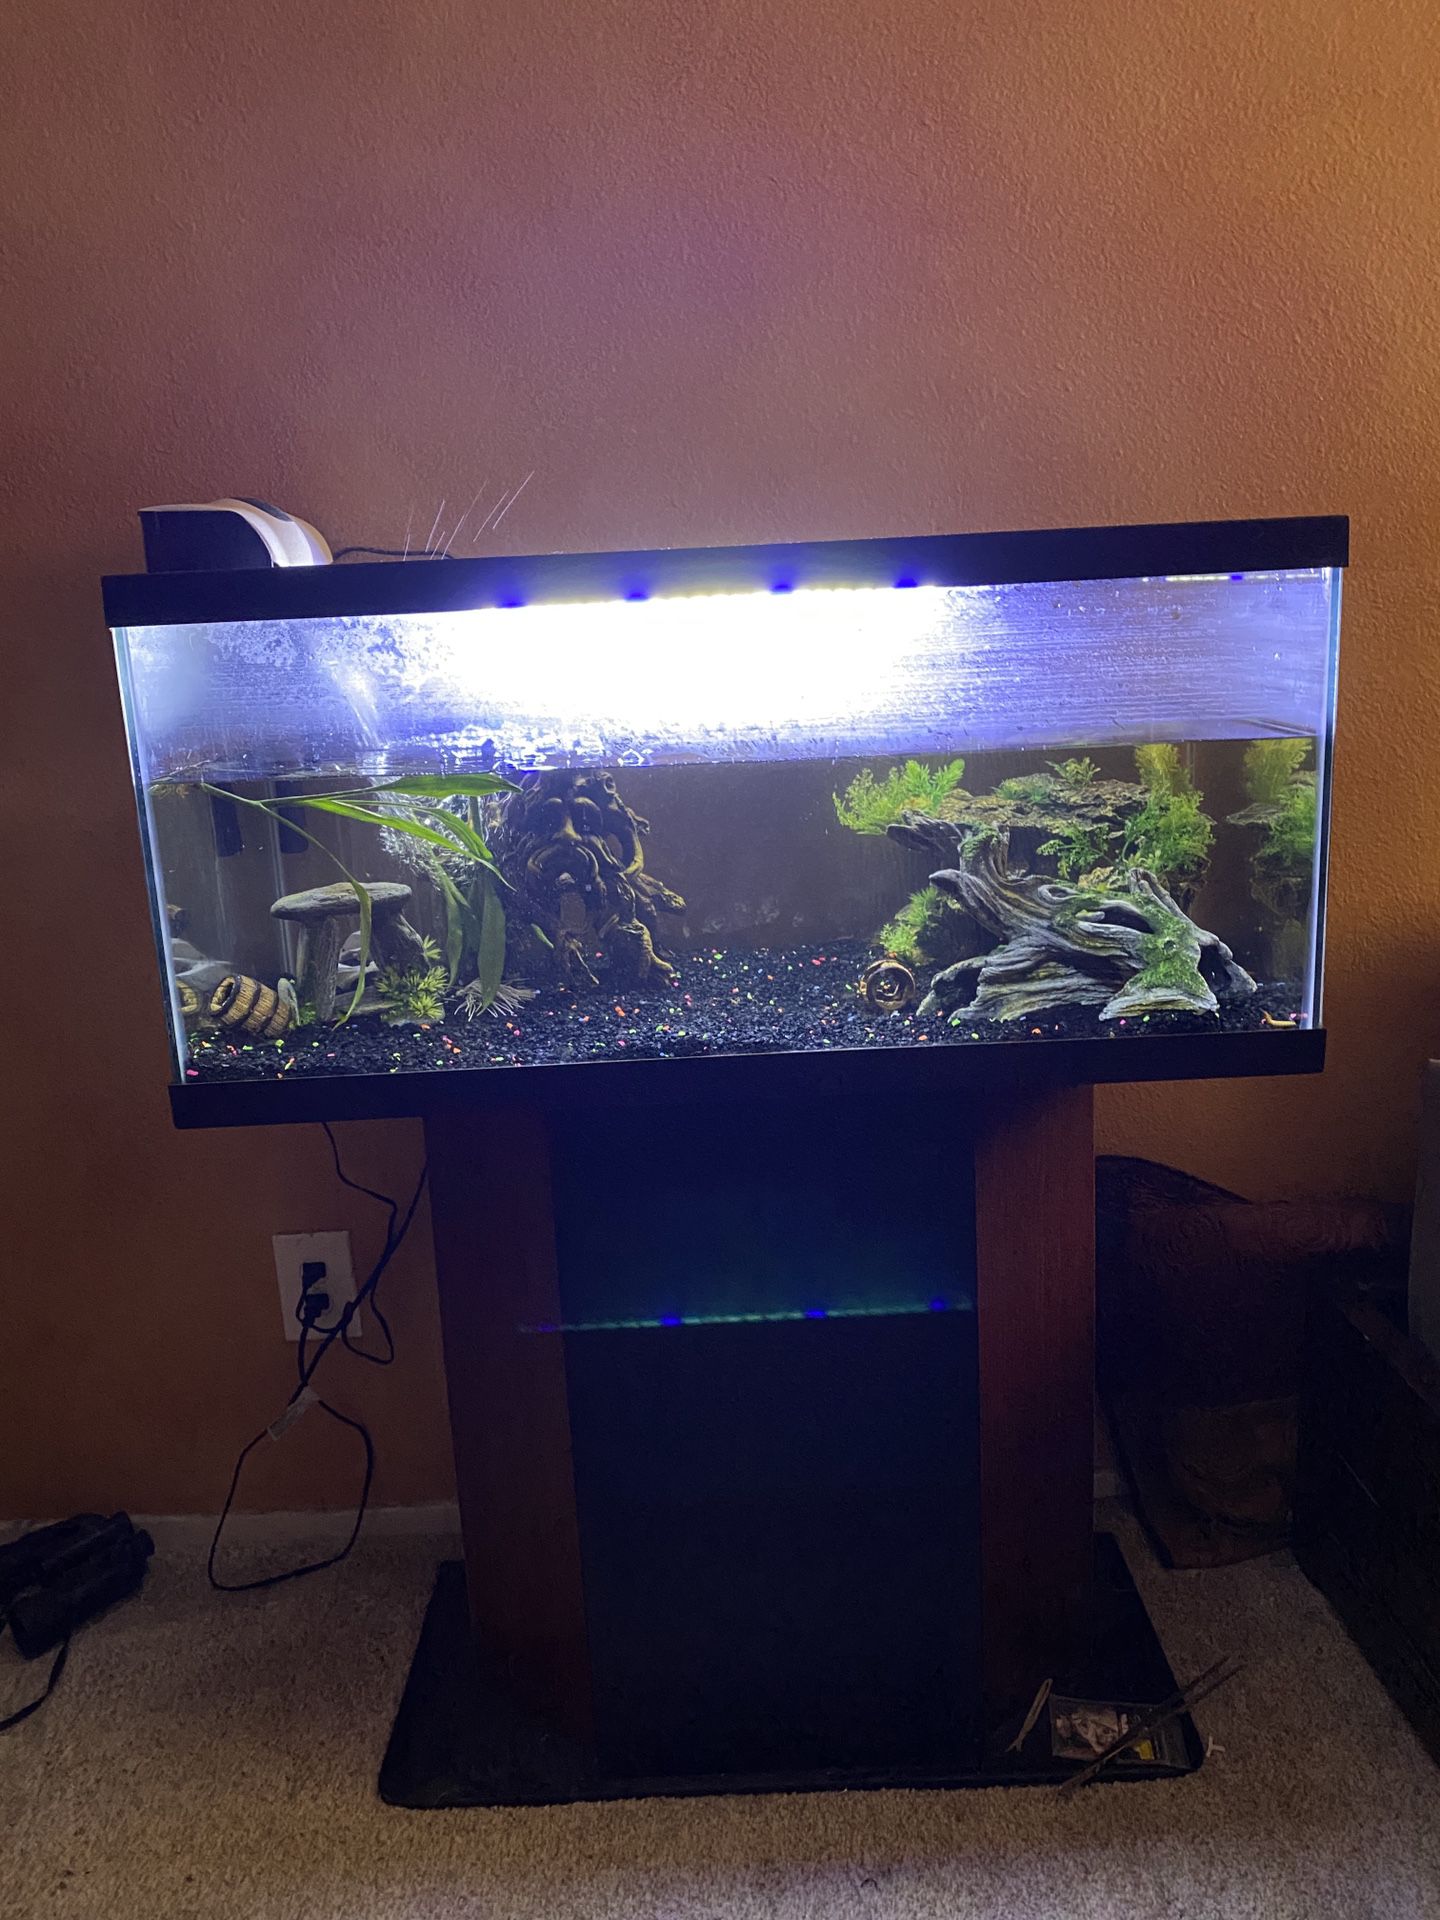 50 gallon fish tank with filter and 2 color light bar